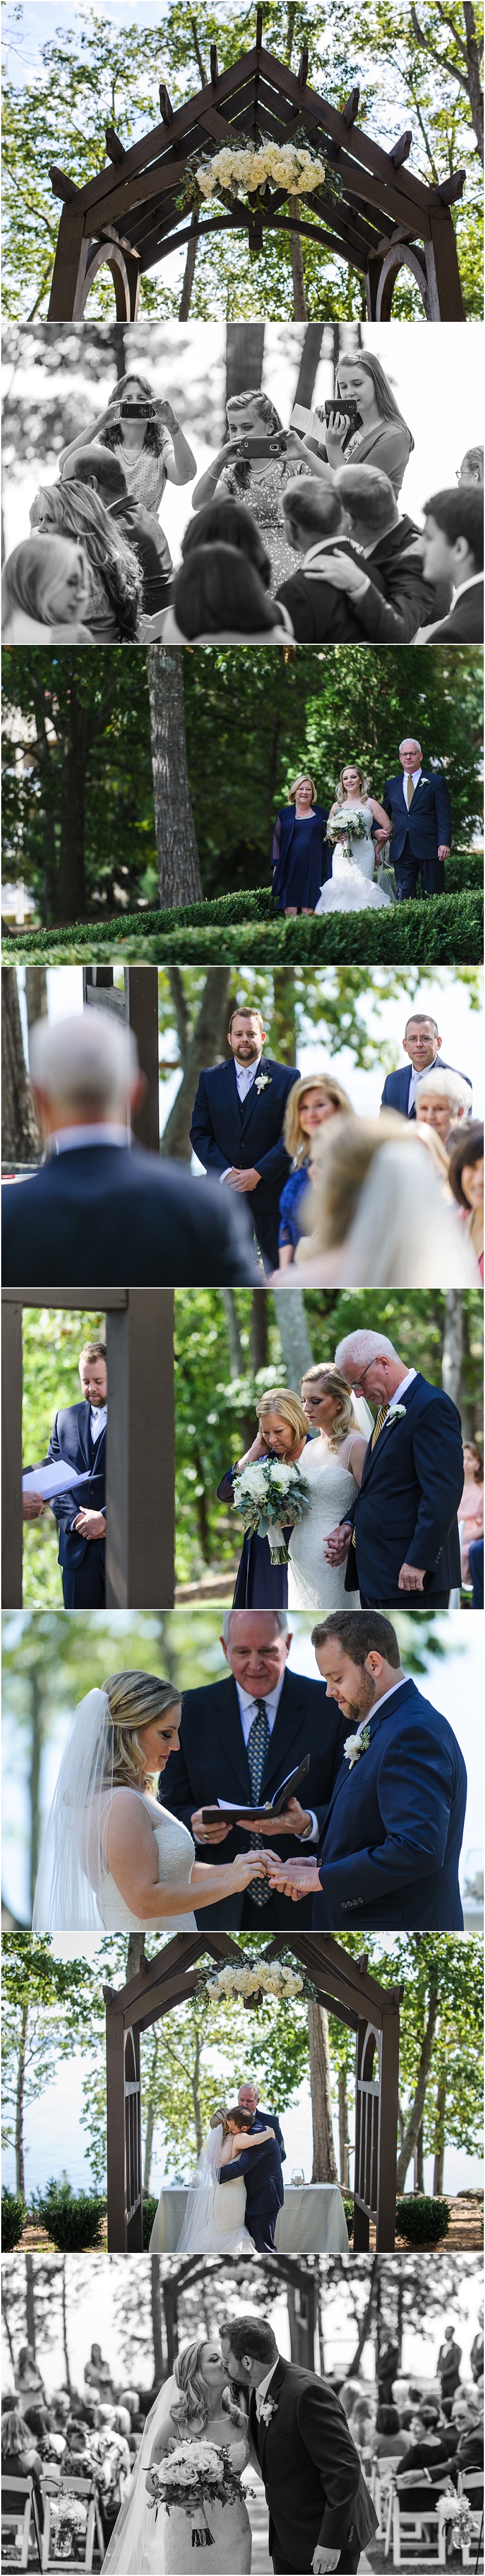 We were just on time for the ceremony! The couple exchanged vows under a wooden arch decorated in florals